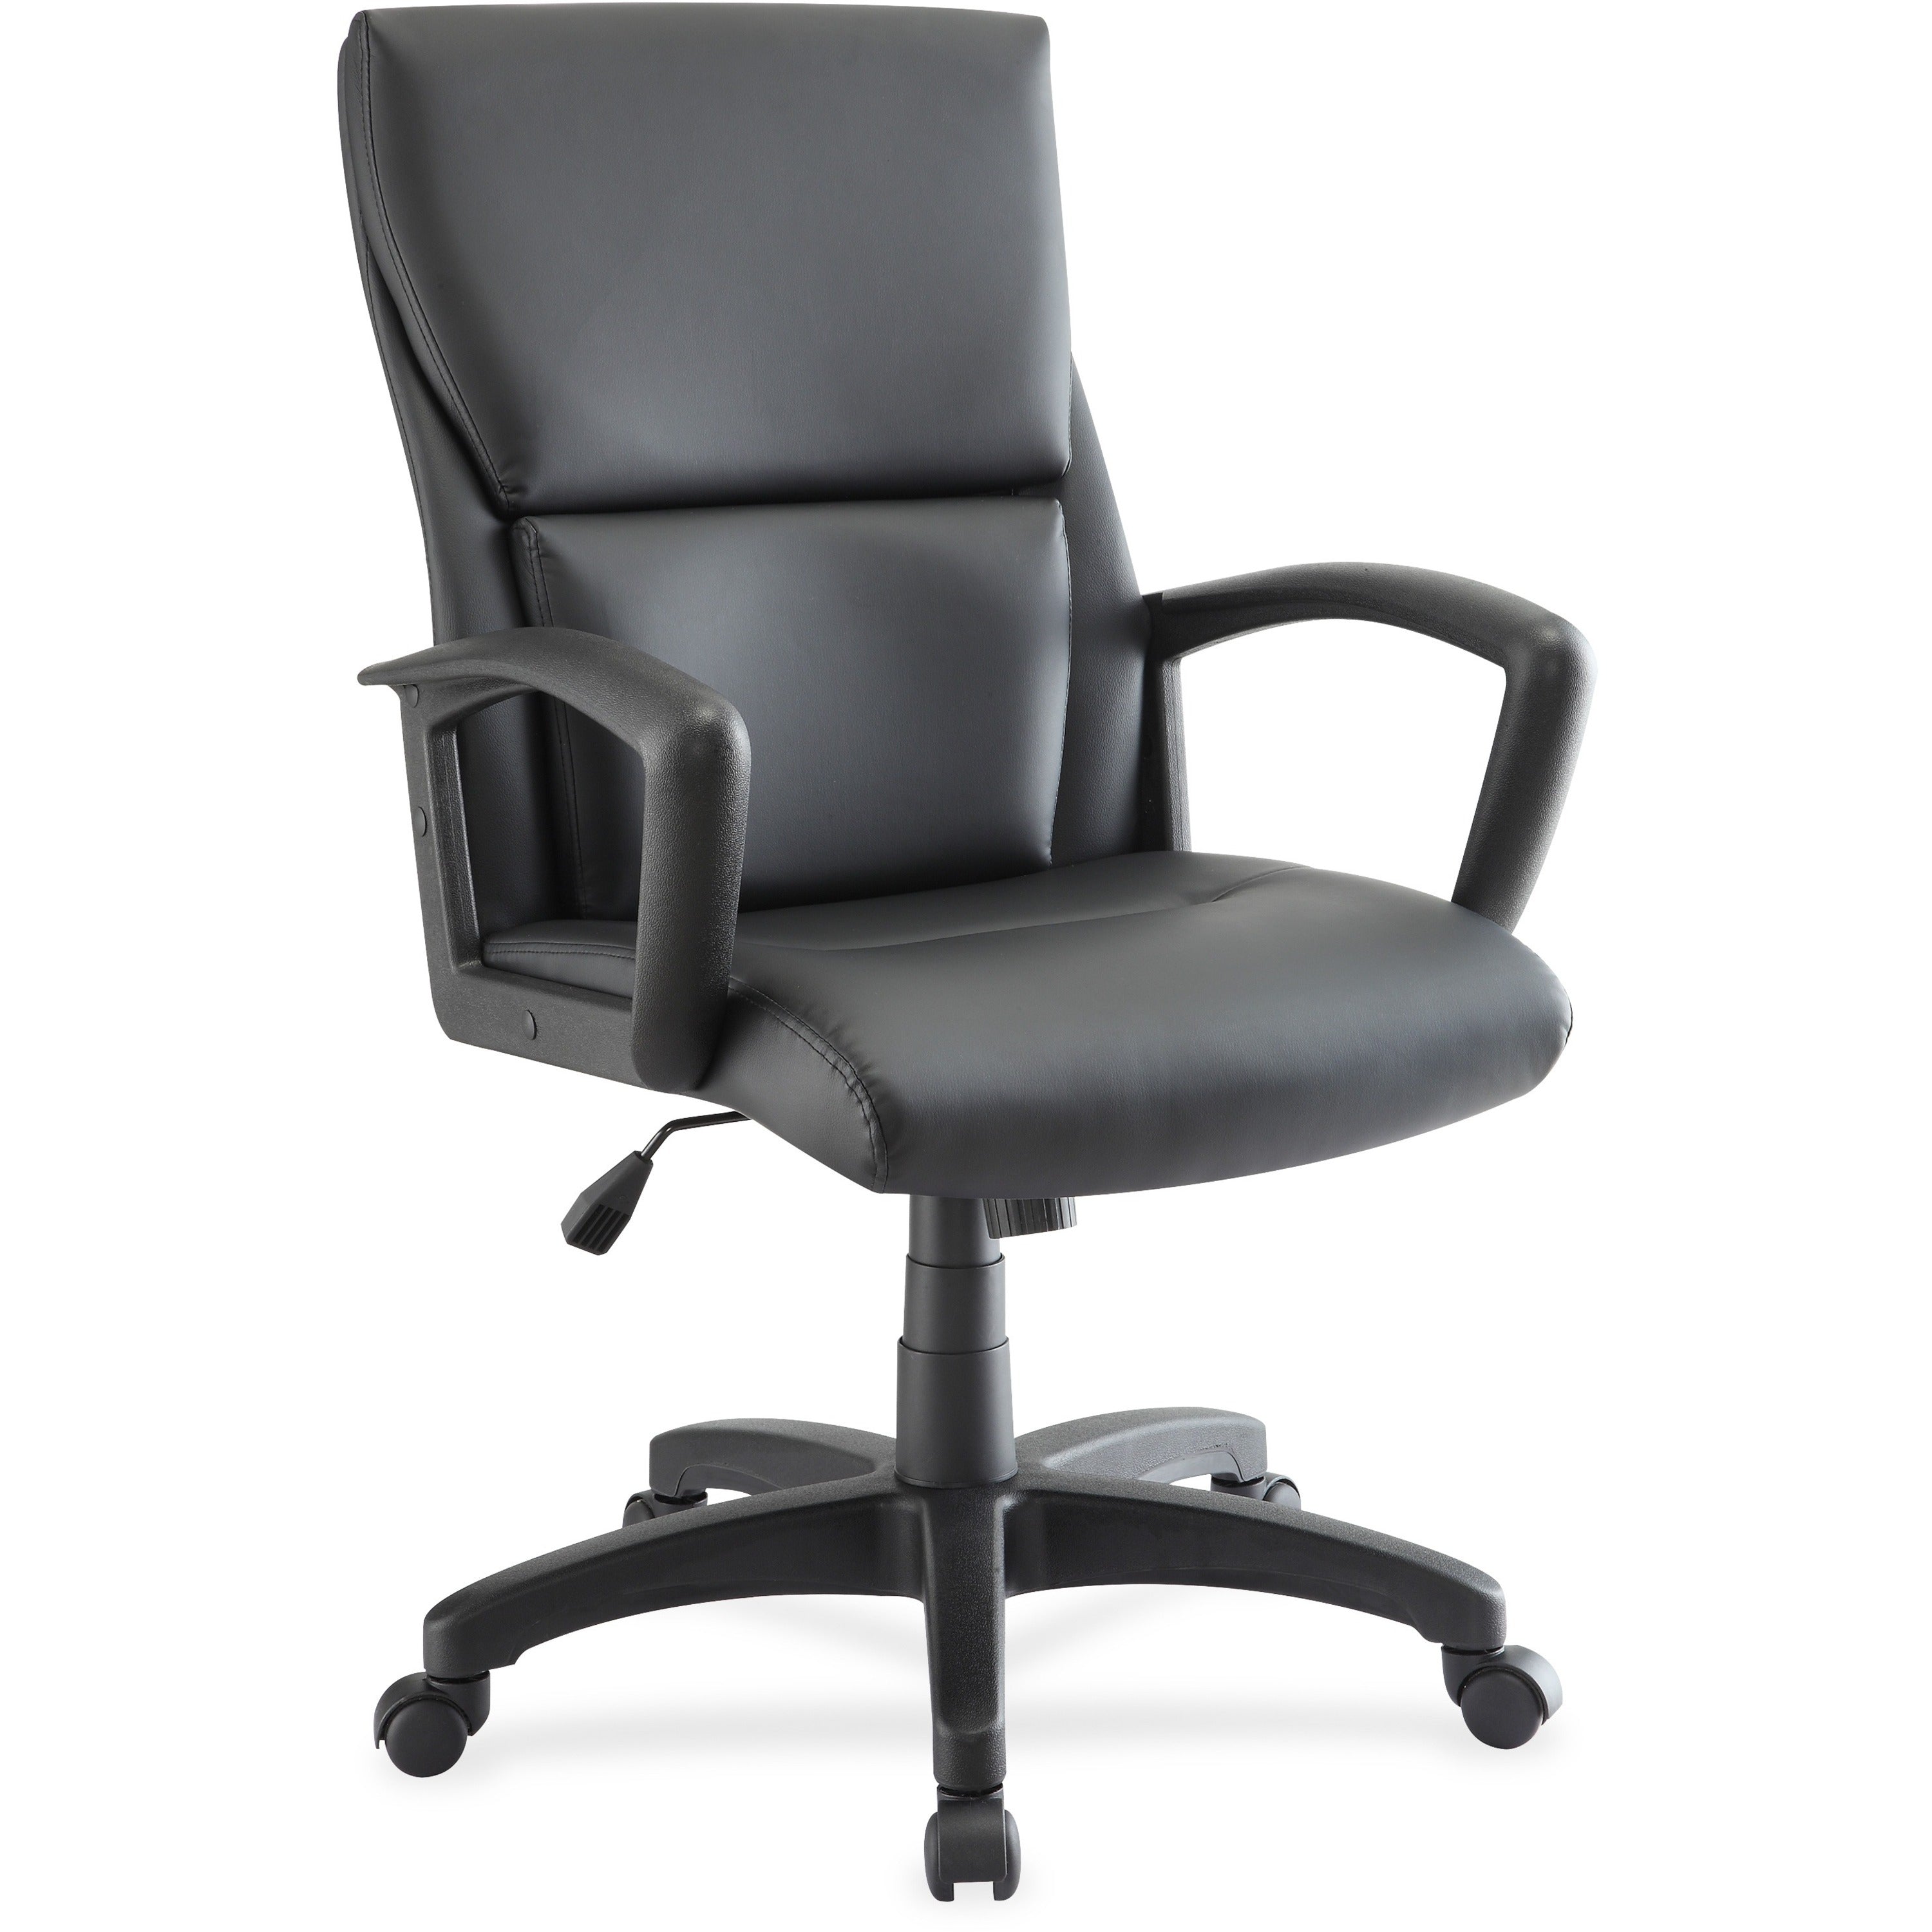 Lorell European Design Executive Mid-back Office Chair - Black Bonded Leather Seat - Black Bonded Leather Back - 5-star Base - Black - 1 Each - 